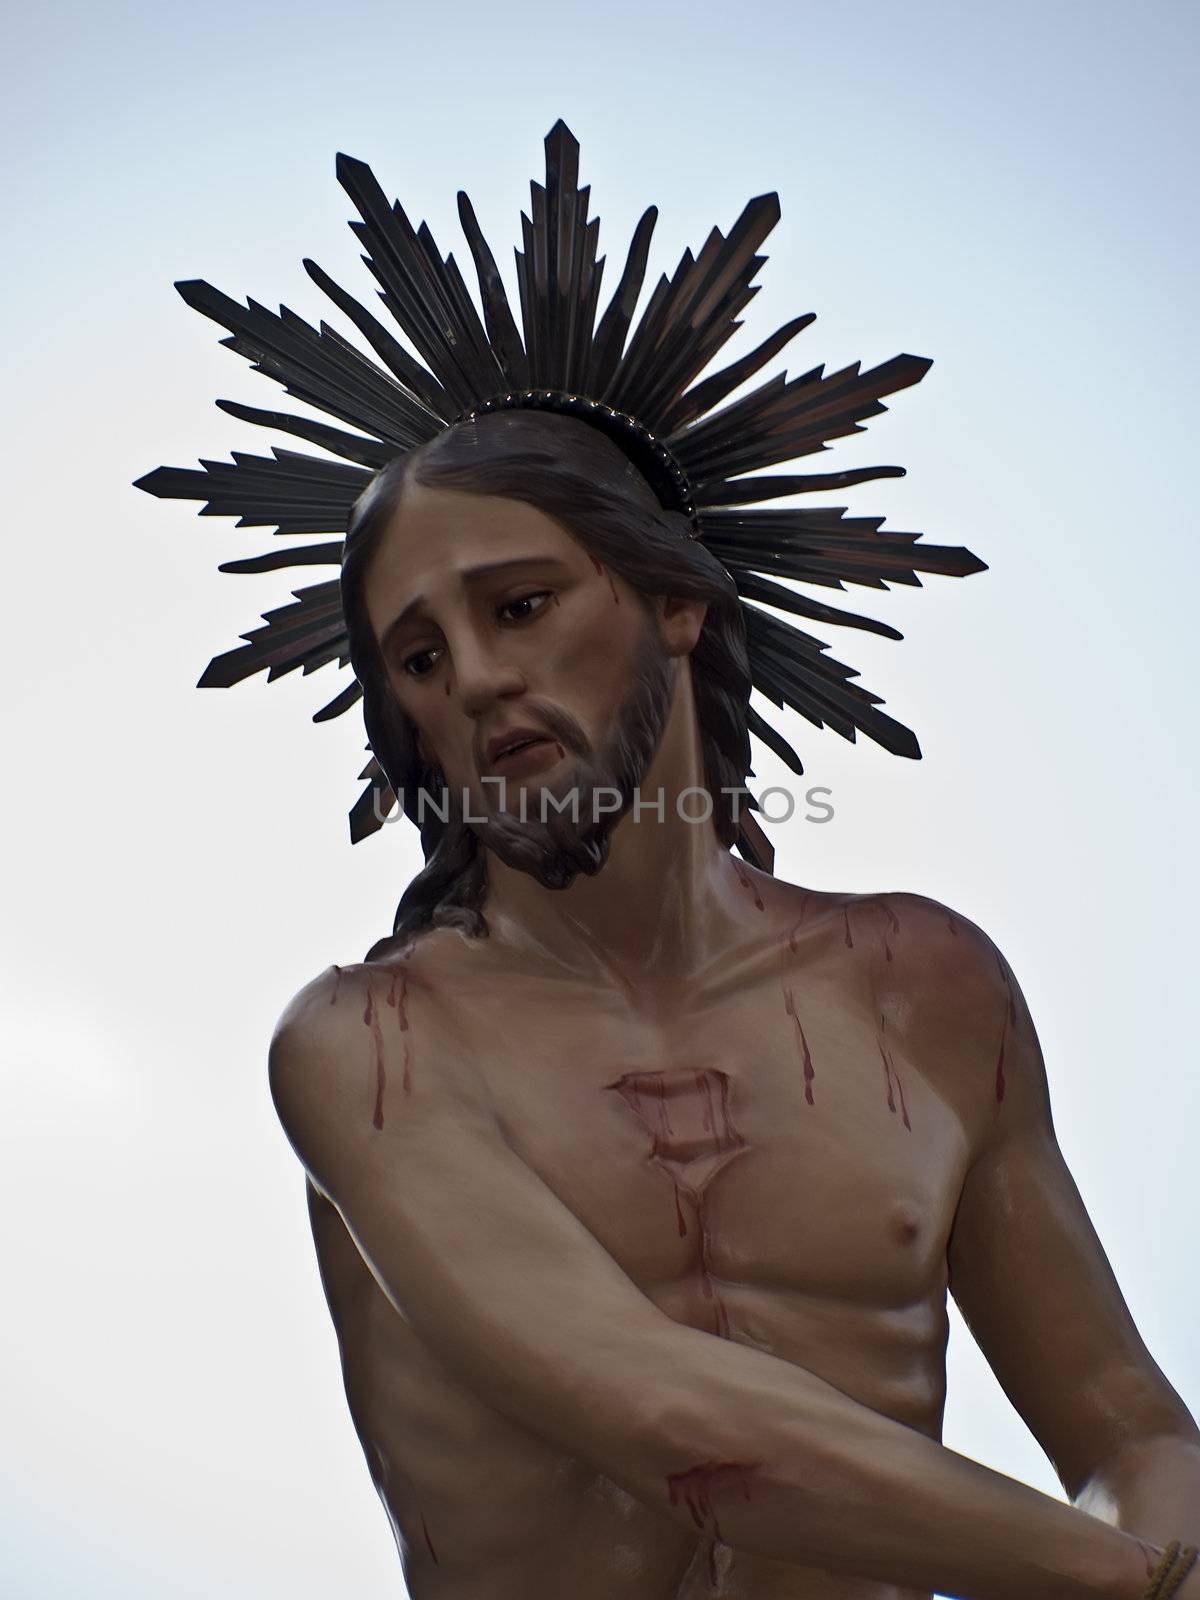 Statue of Jesus Christ during the Good Friday procession in Malta April 10, 2009